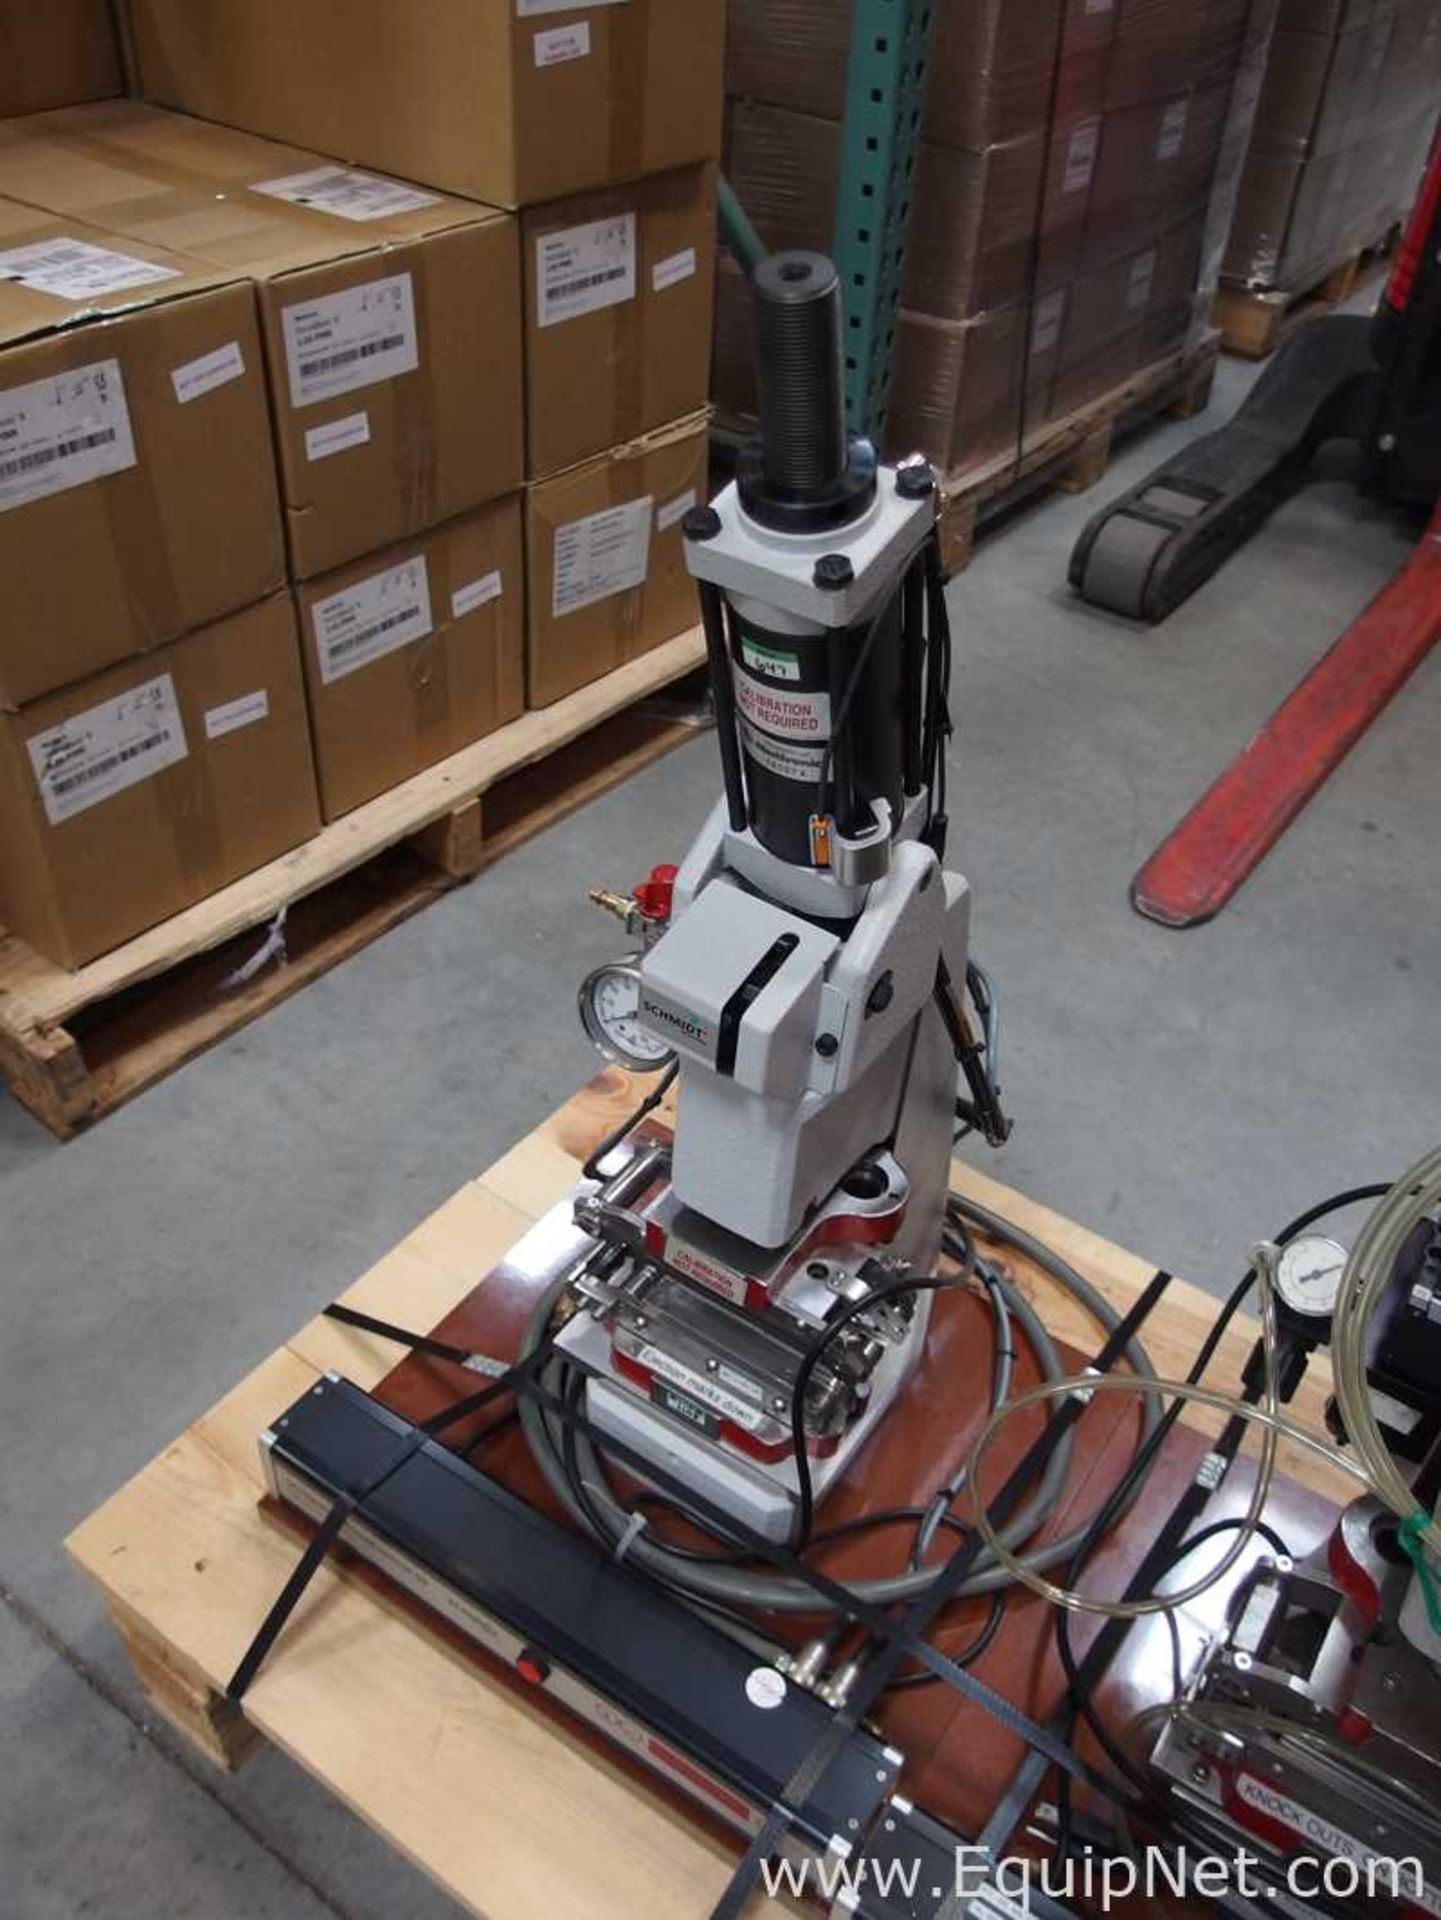 Schmidt 32-60 Pneumatic Toggle Press with PressControl 50 Integrated Two Hand Control